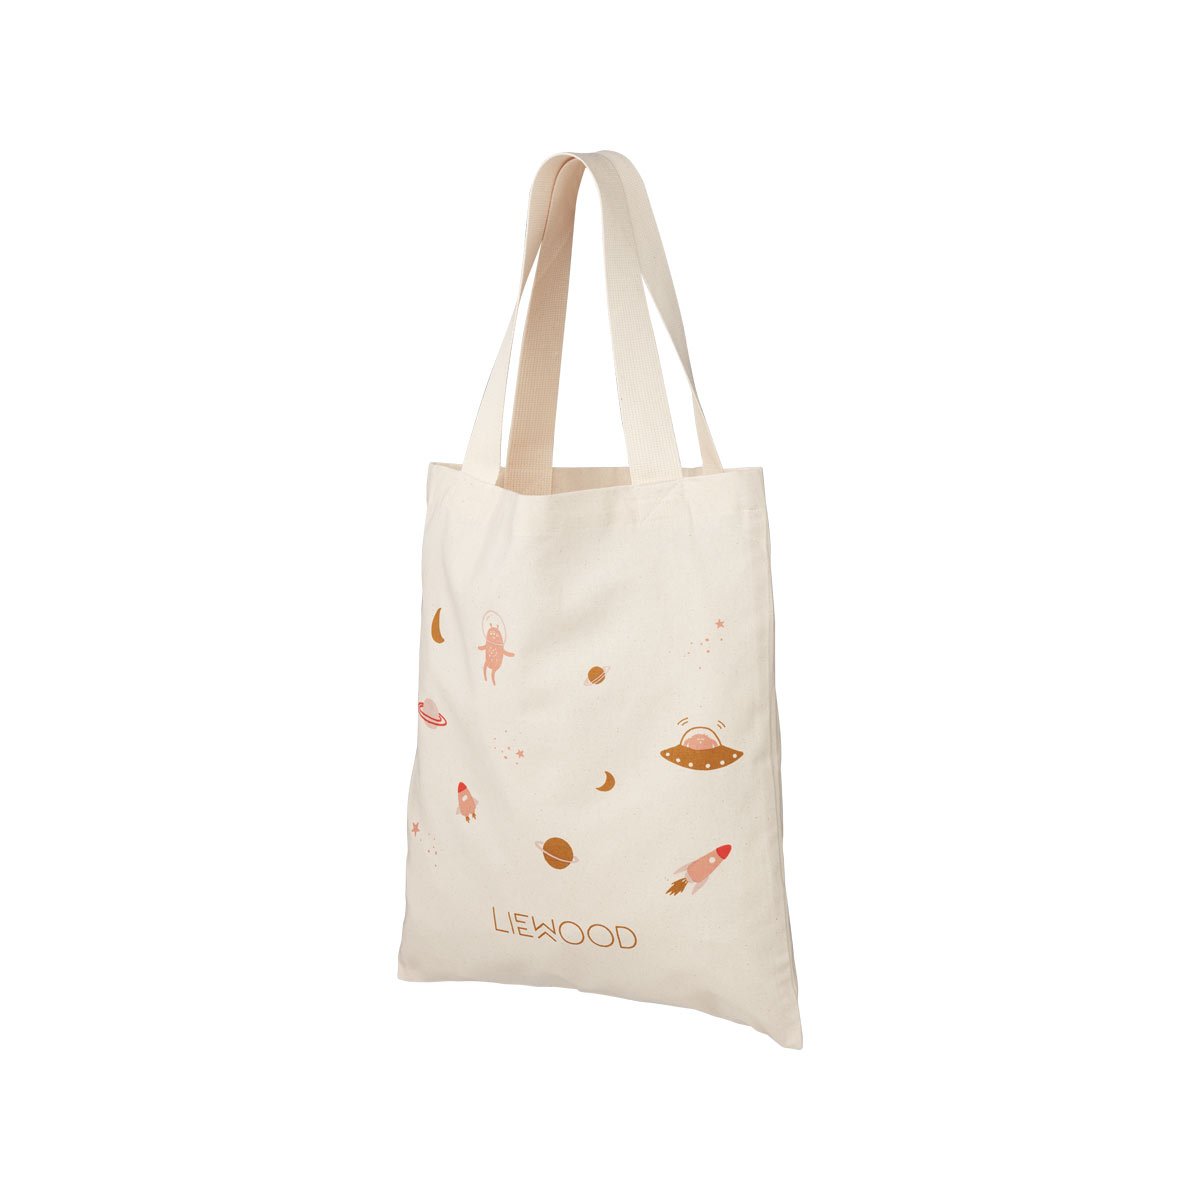 Liewood Tote Bag - Small - Space Rose Mix